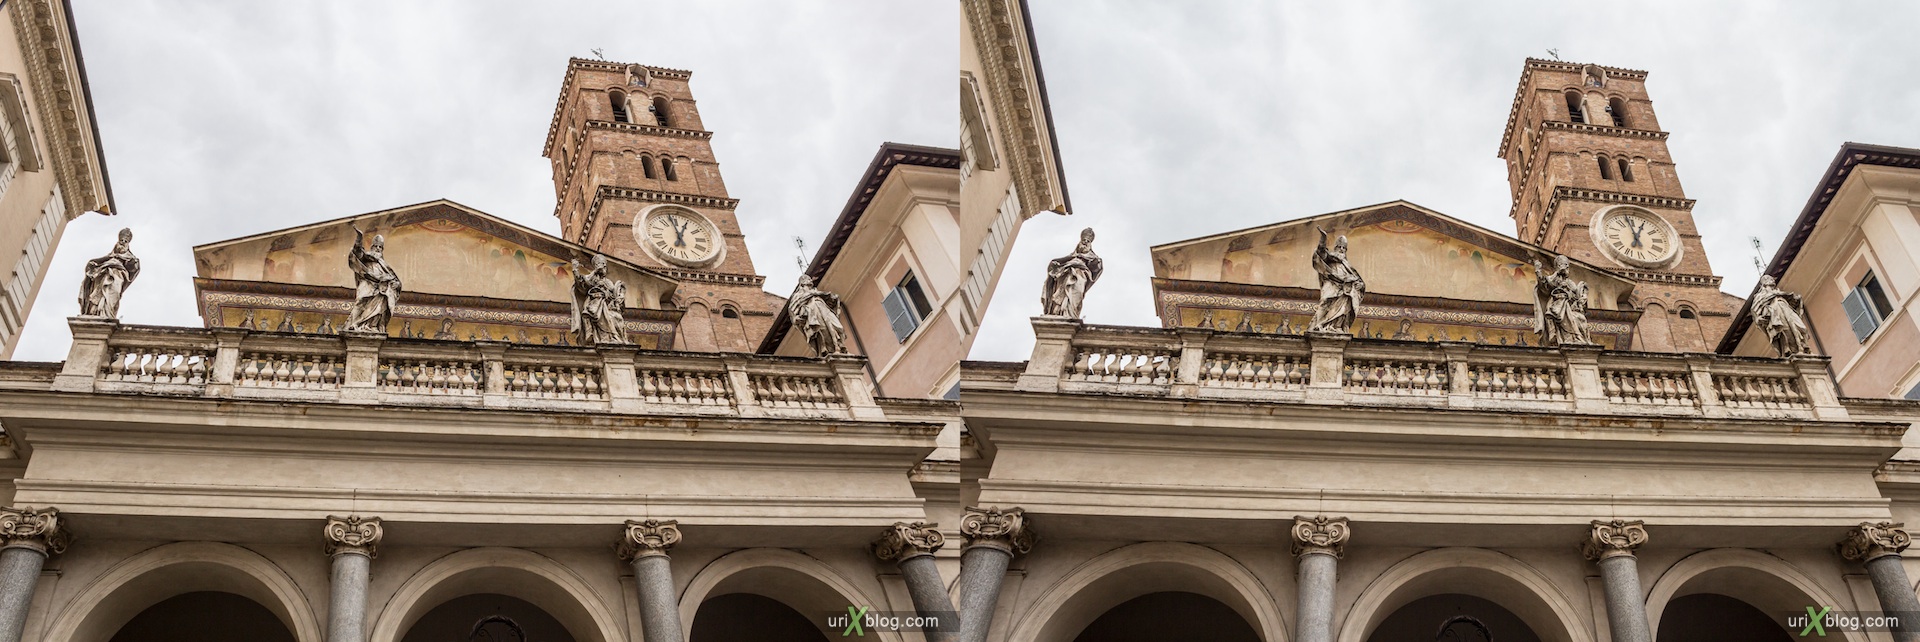 2012, Santa Maria in Trastevere church, Rome, Italy, cathedral, monastery, Christianity, Catholicism, 3D, stereo pair, cross-eyed, crossview, cross view stereo pair